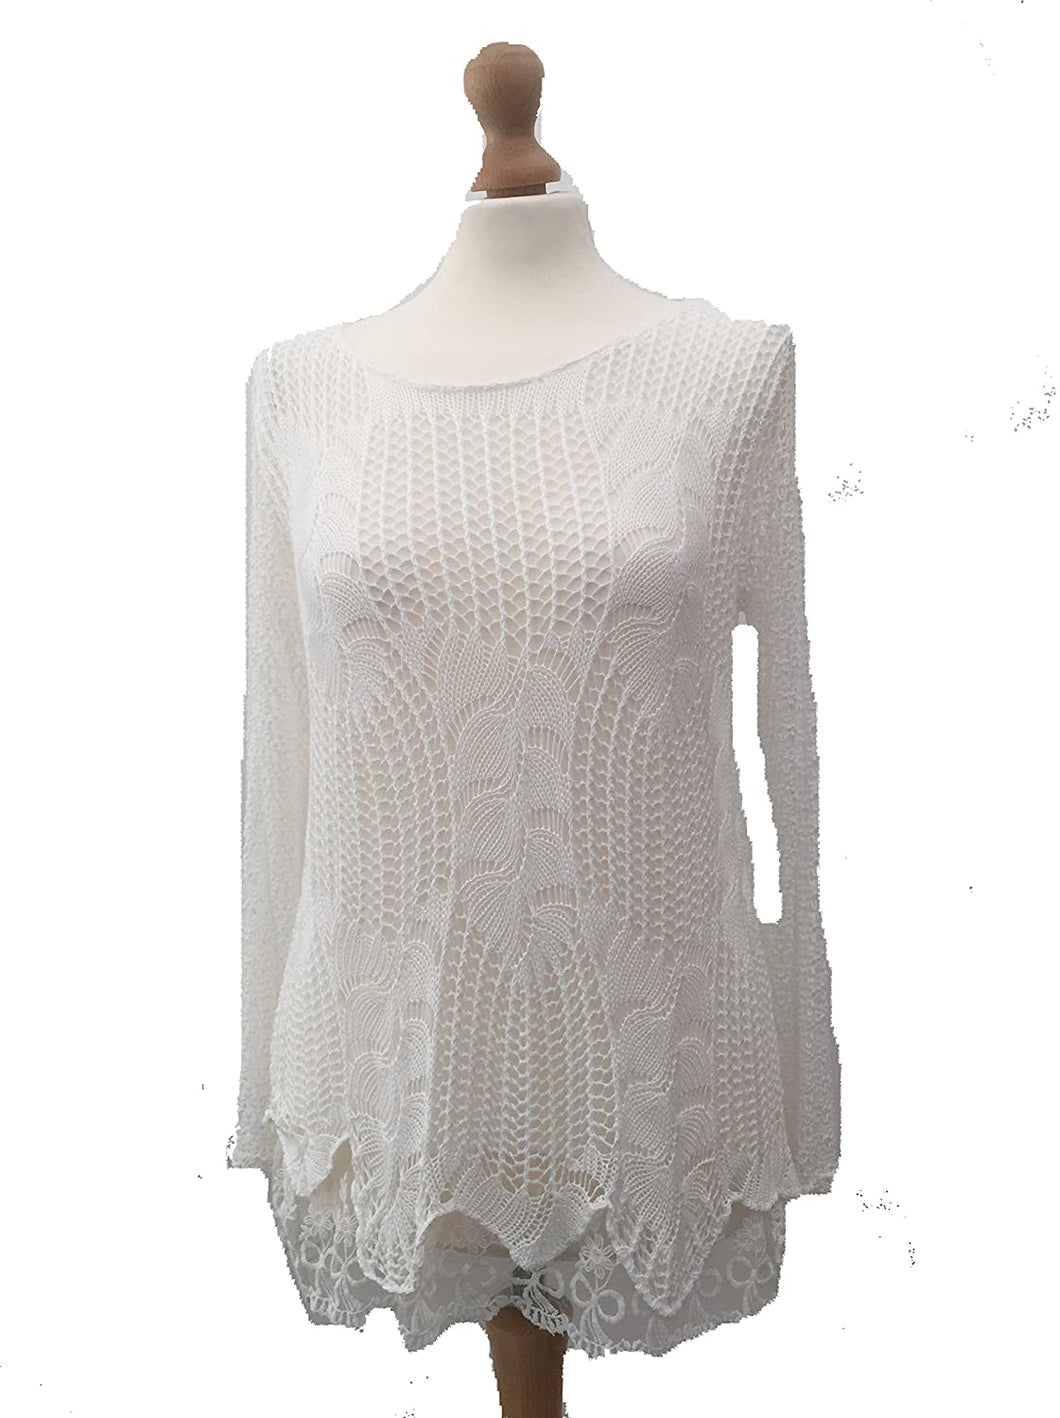 Pamper Yourself Now ltd Ladies White Crochet lace Long Sleeve top. Made in Italy (AA1)